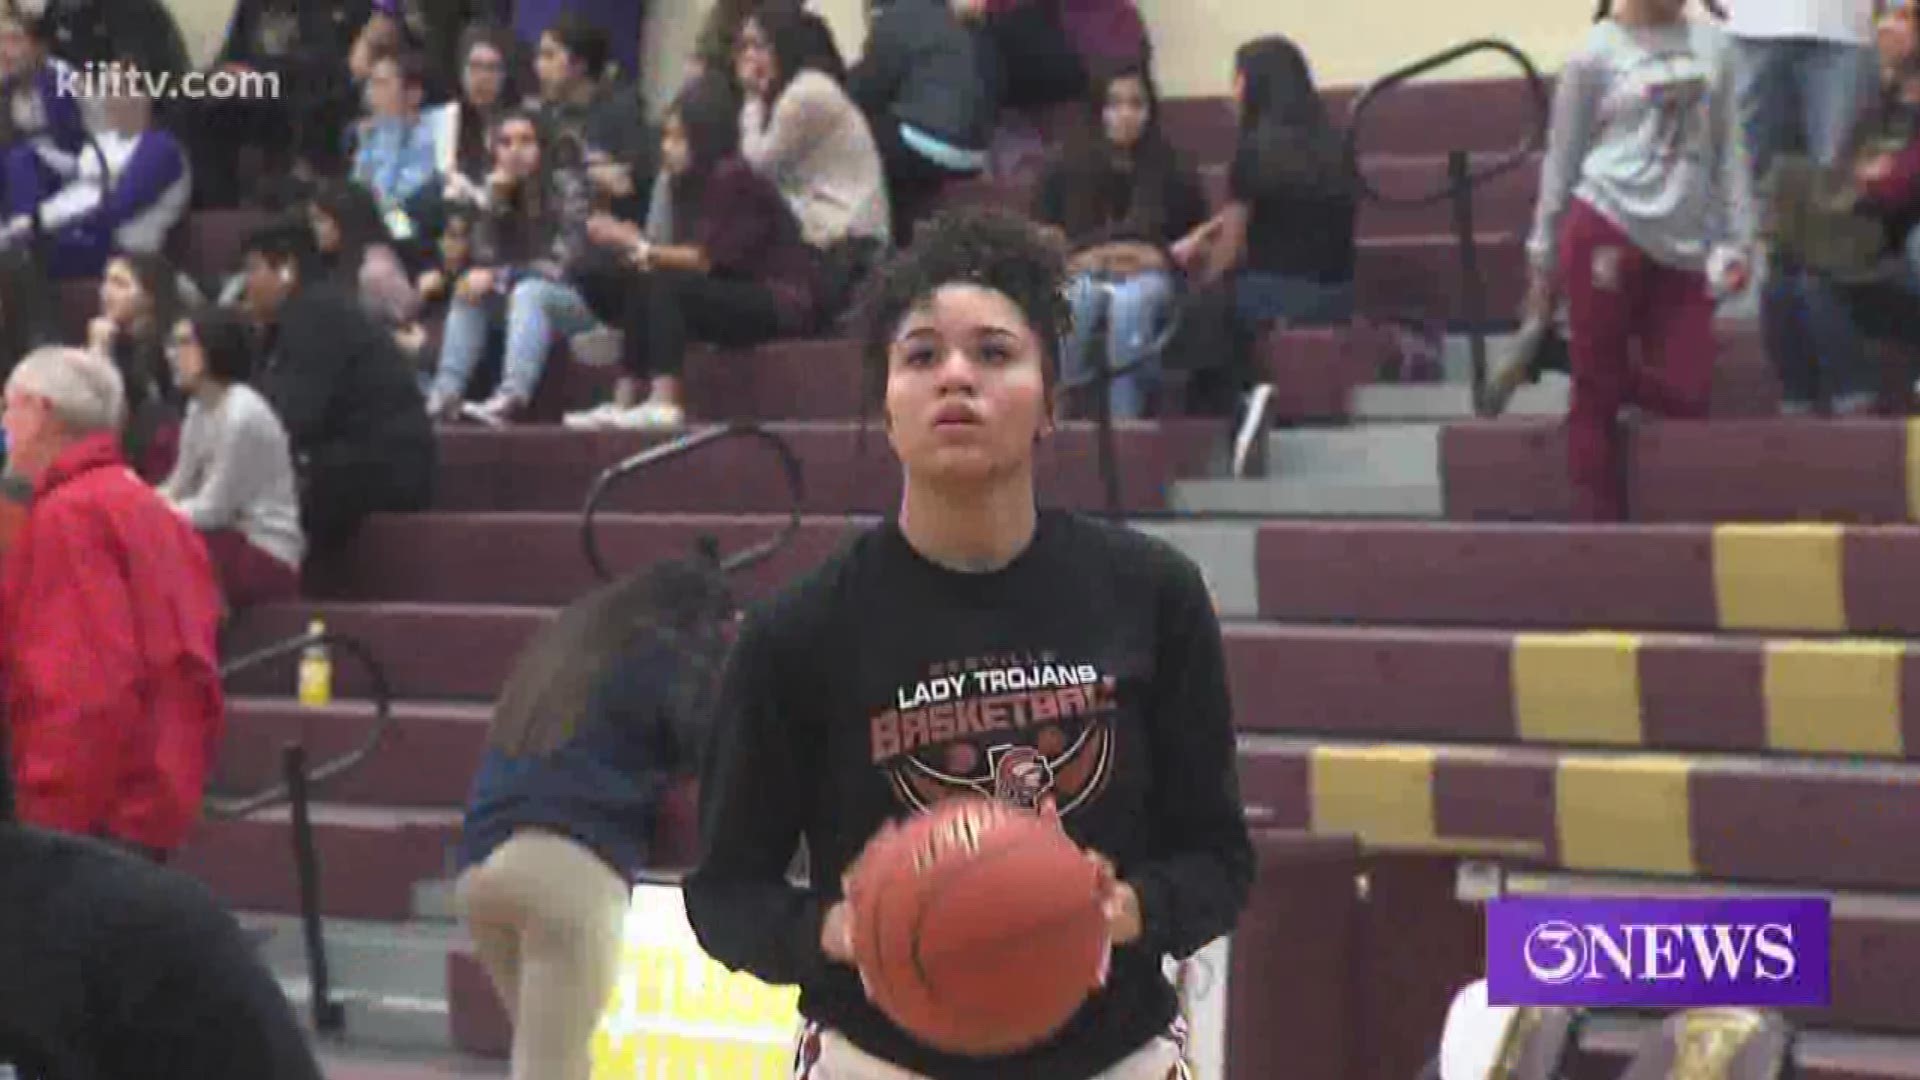 Beeville topped Incarnate Word Academy 45-40 as the Lady Trojans jumped out to a hot start.